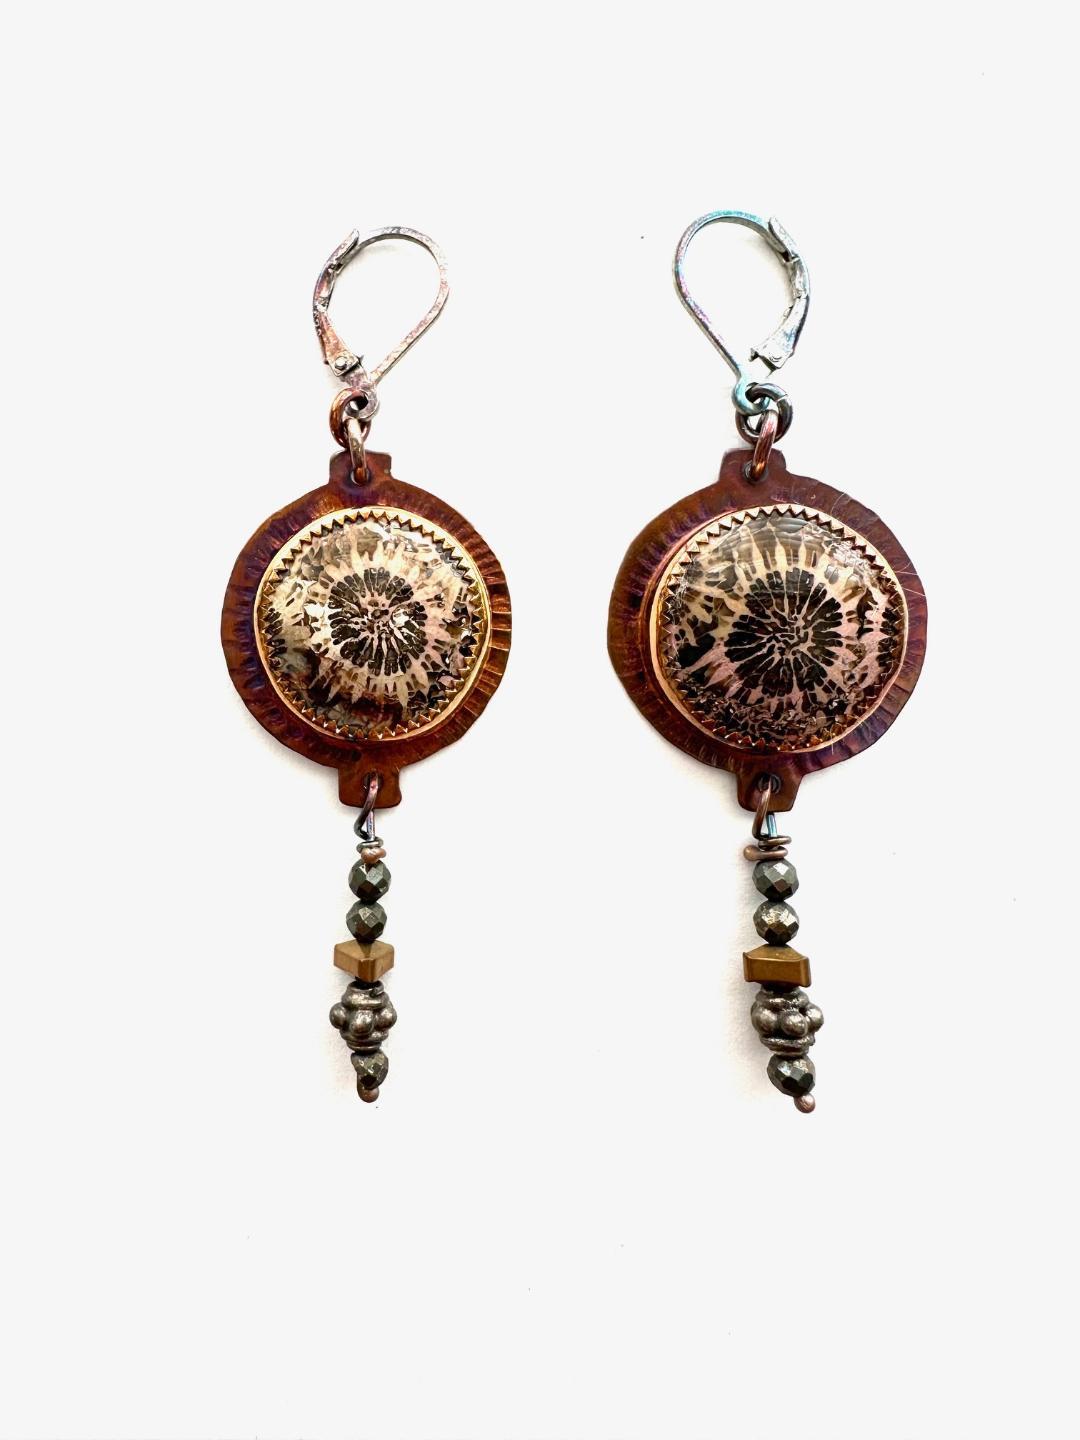 Sterling Silver, Fine Silver Bezel, and Fossilized Coral Earrings with a Pyrite and Sterling Bead Dangle and a Lever Earwire